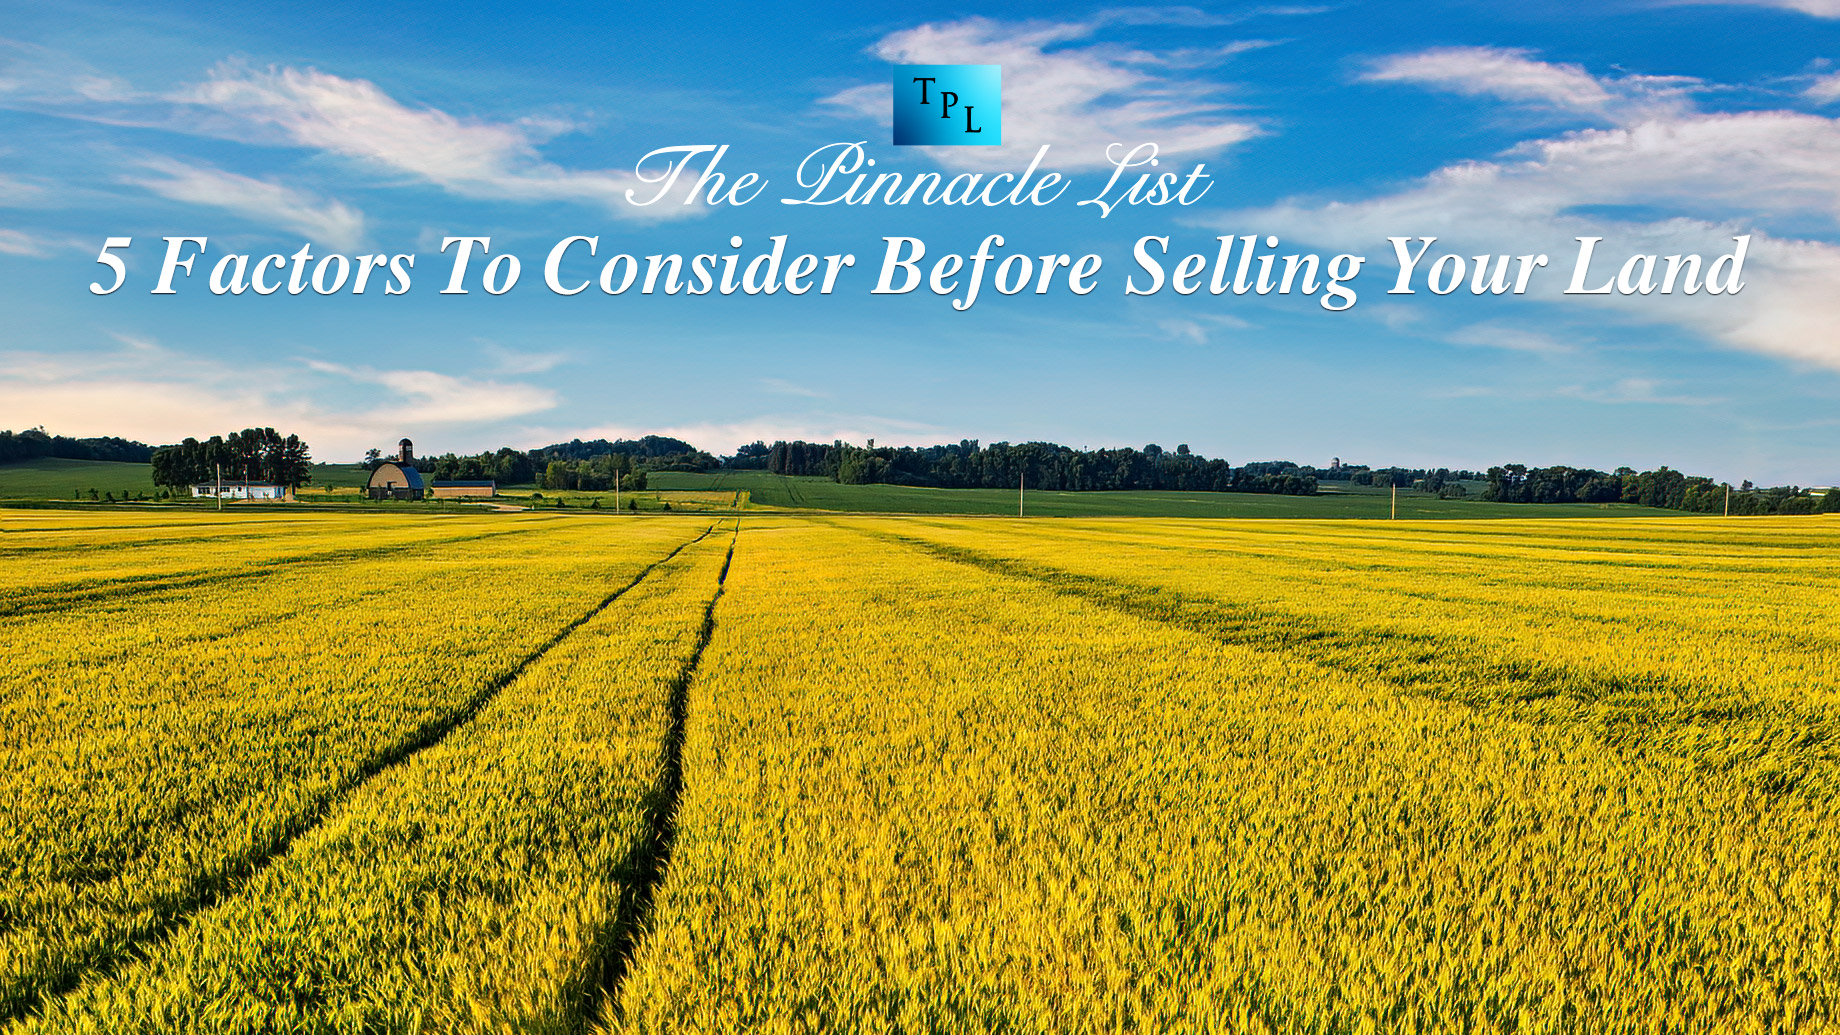 5 Factors To Consider Before Selling Your Land